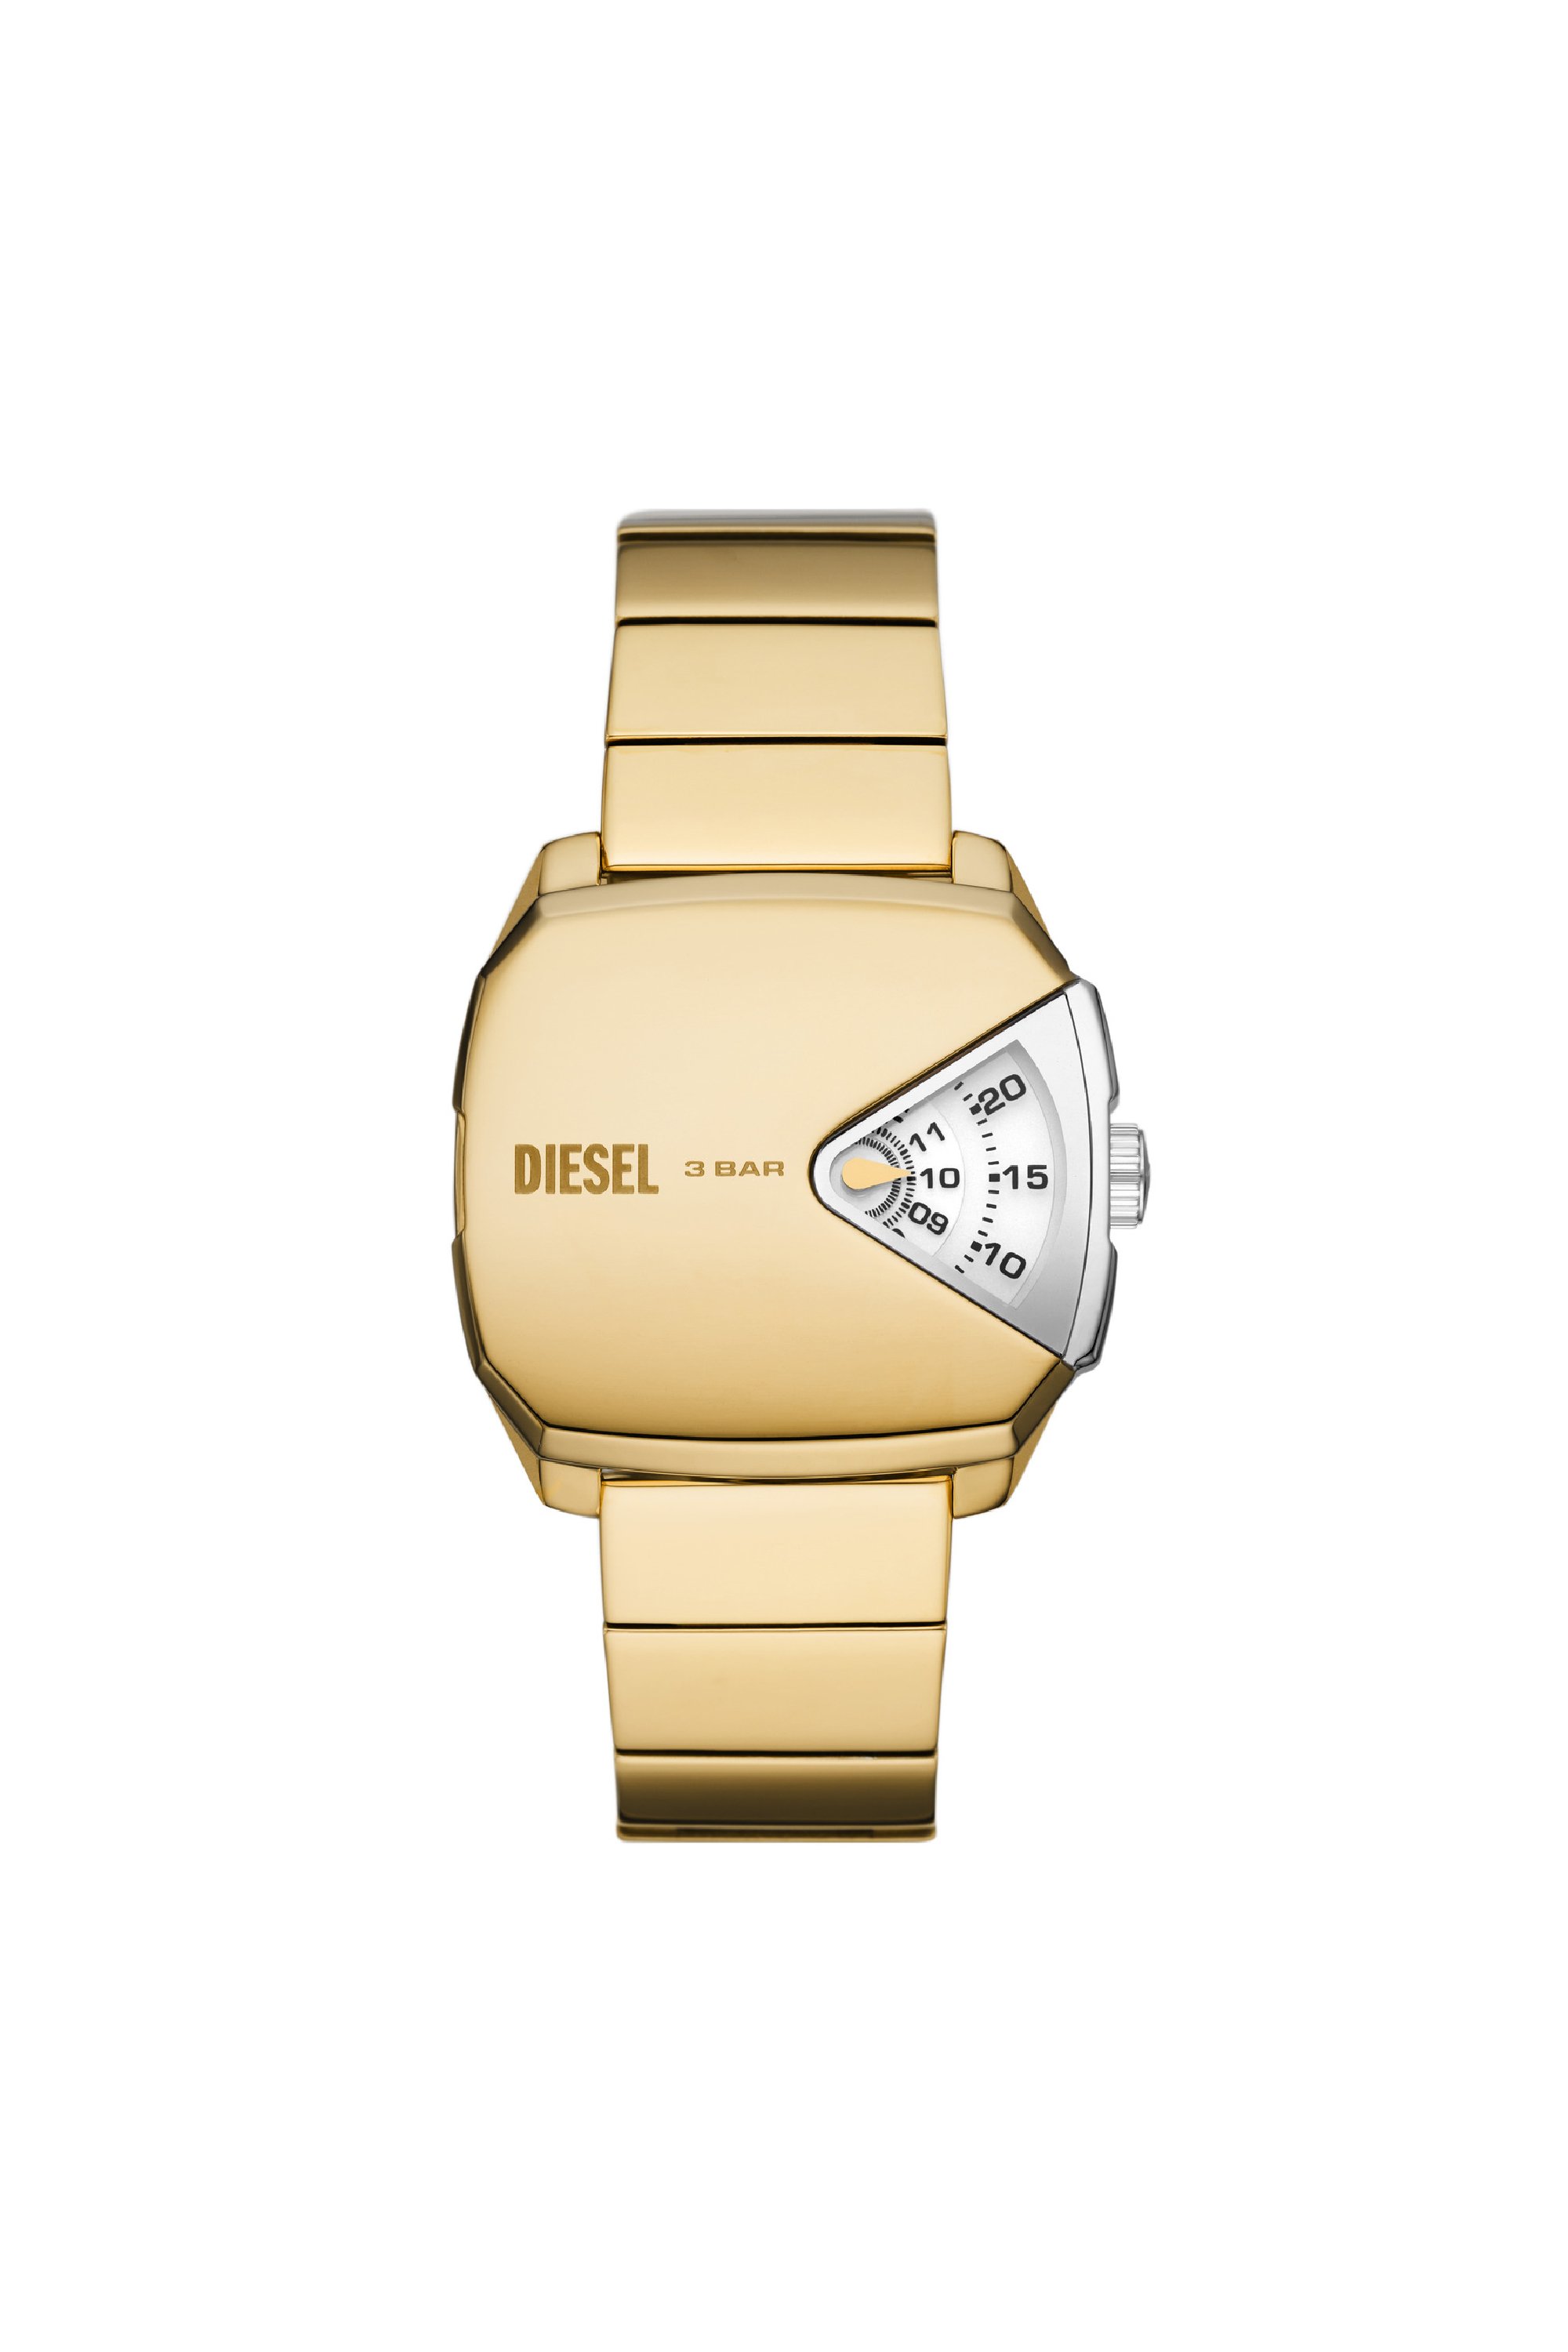 DIESEL D.V.A. STAINLESS STEEL WATCH